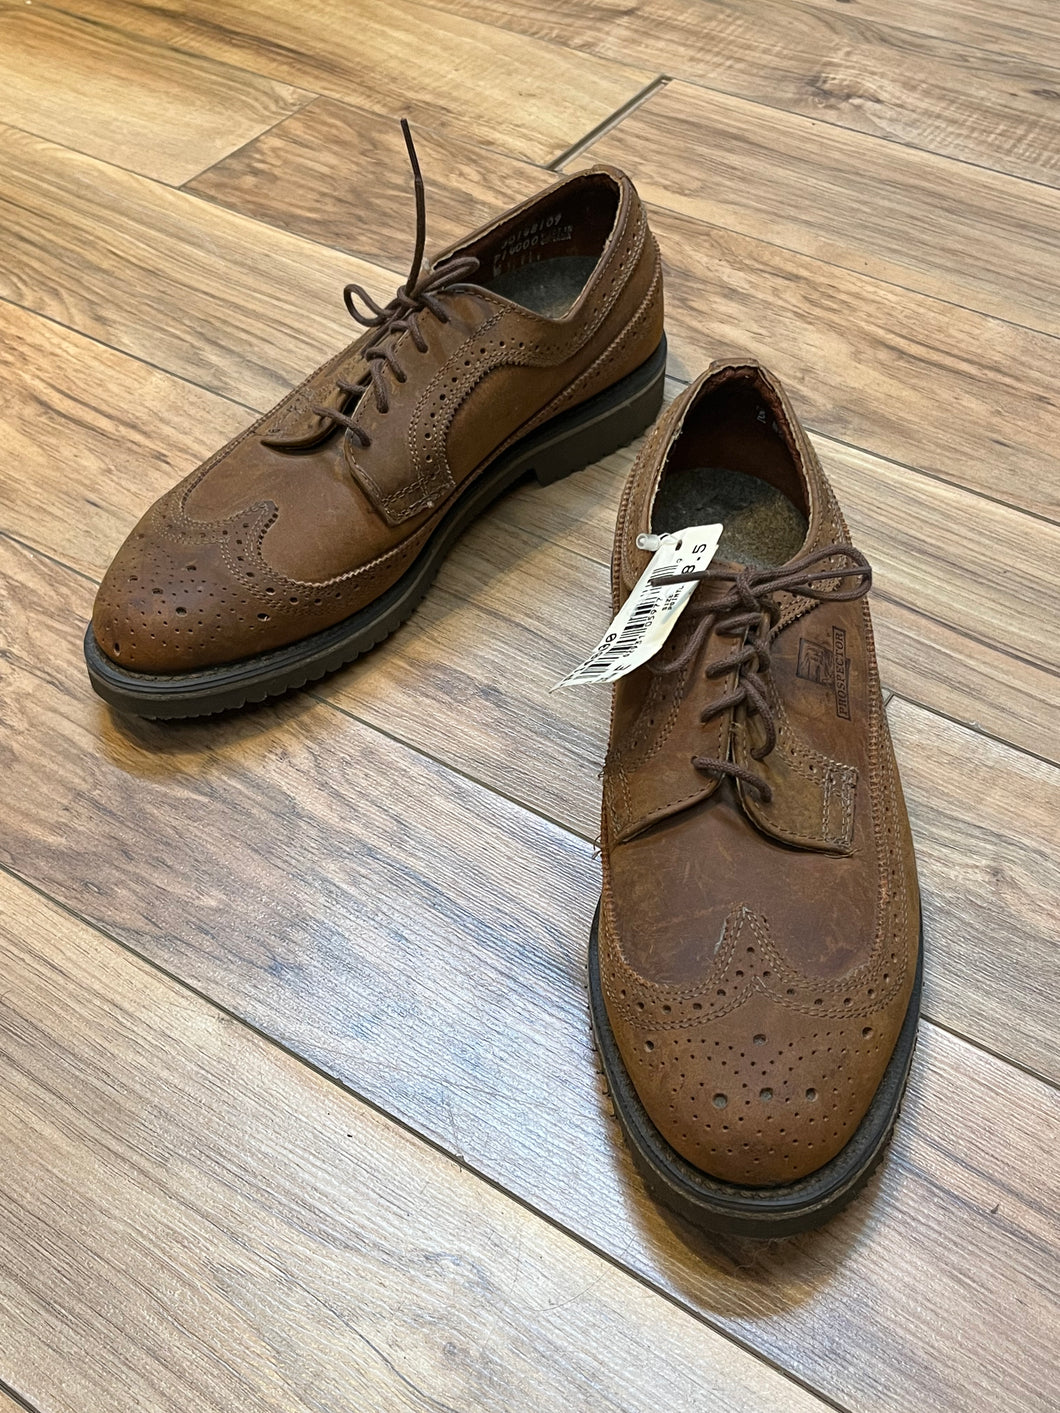 Vintage Prospector 1980’s NWT deadstock brown leather five eyelet wingtip brogue derby shoe.

Made in Canada
Size 8.5 US mens